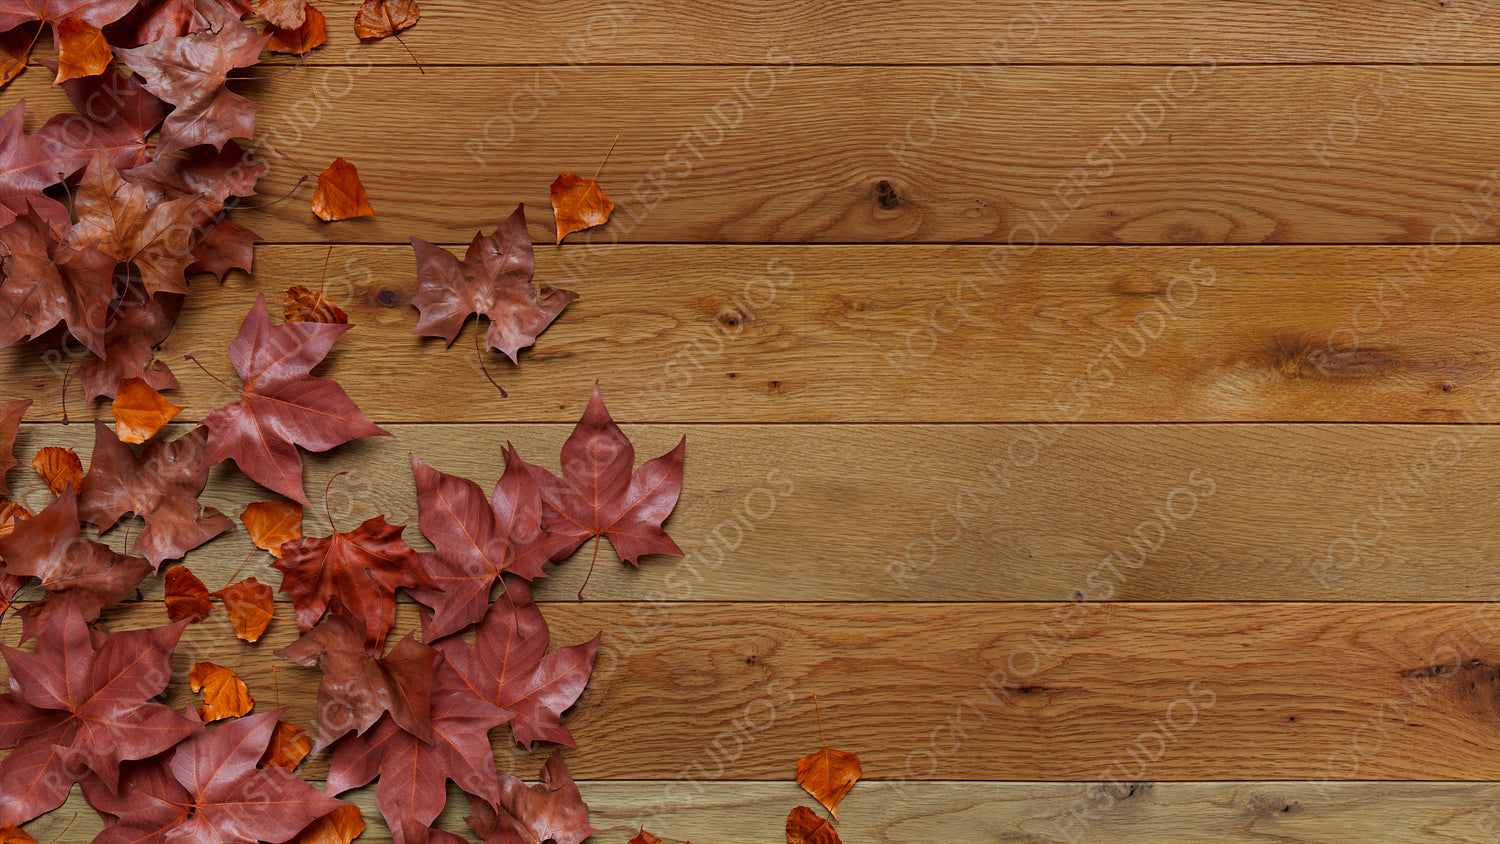 Top down view of Natural wood Tabletop with leaves.